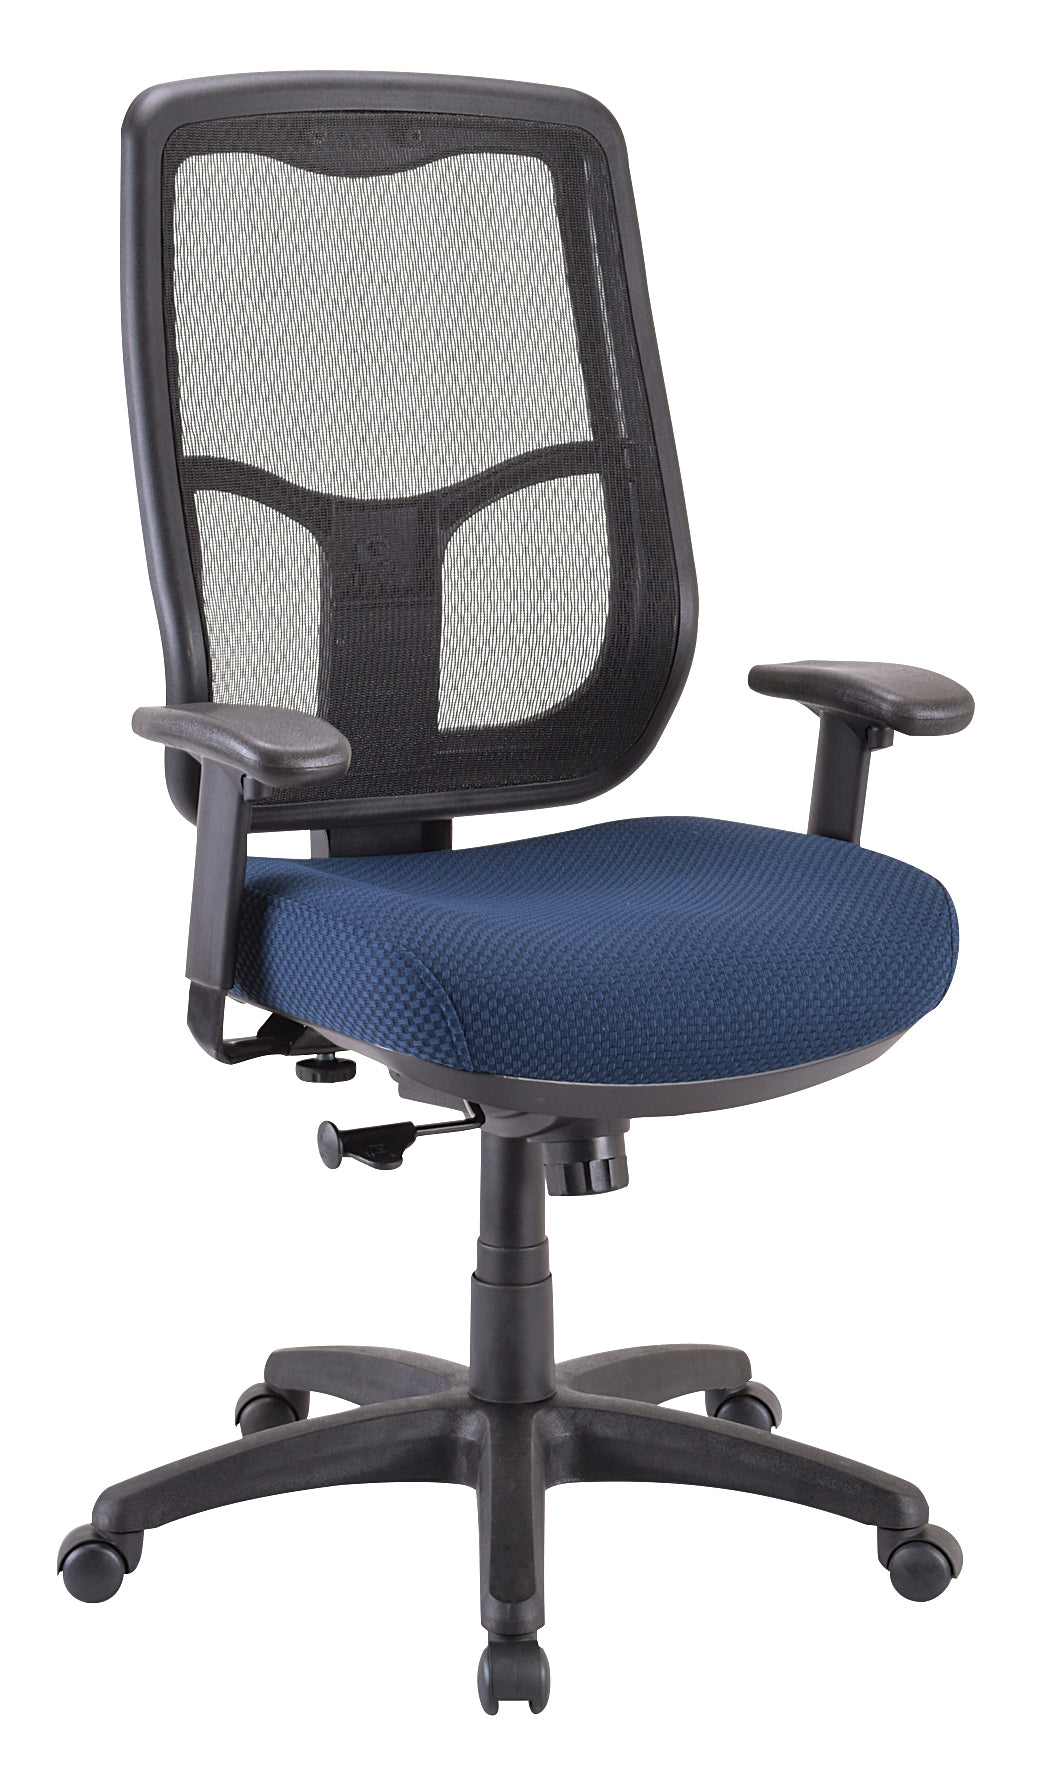 TEMPUR®-944 Office Chair: Everyday Comfort, Elevated